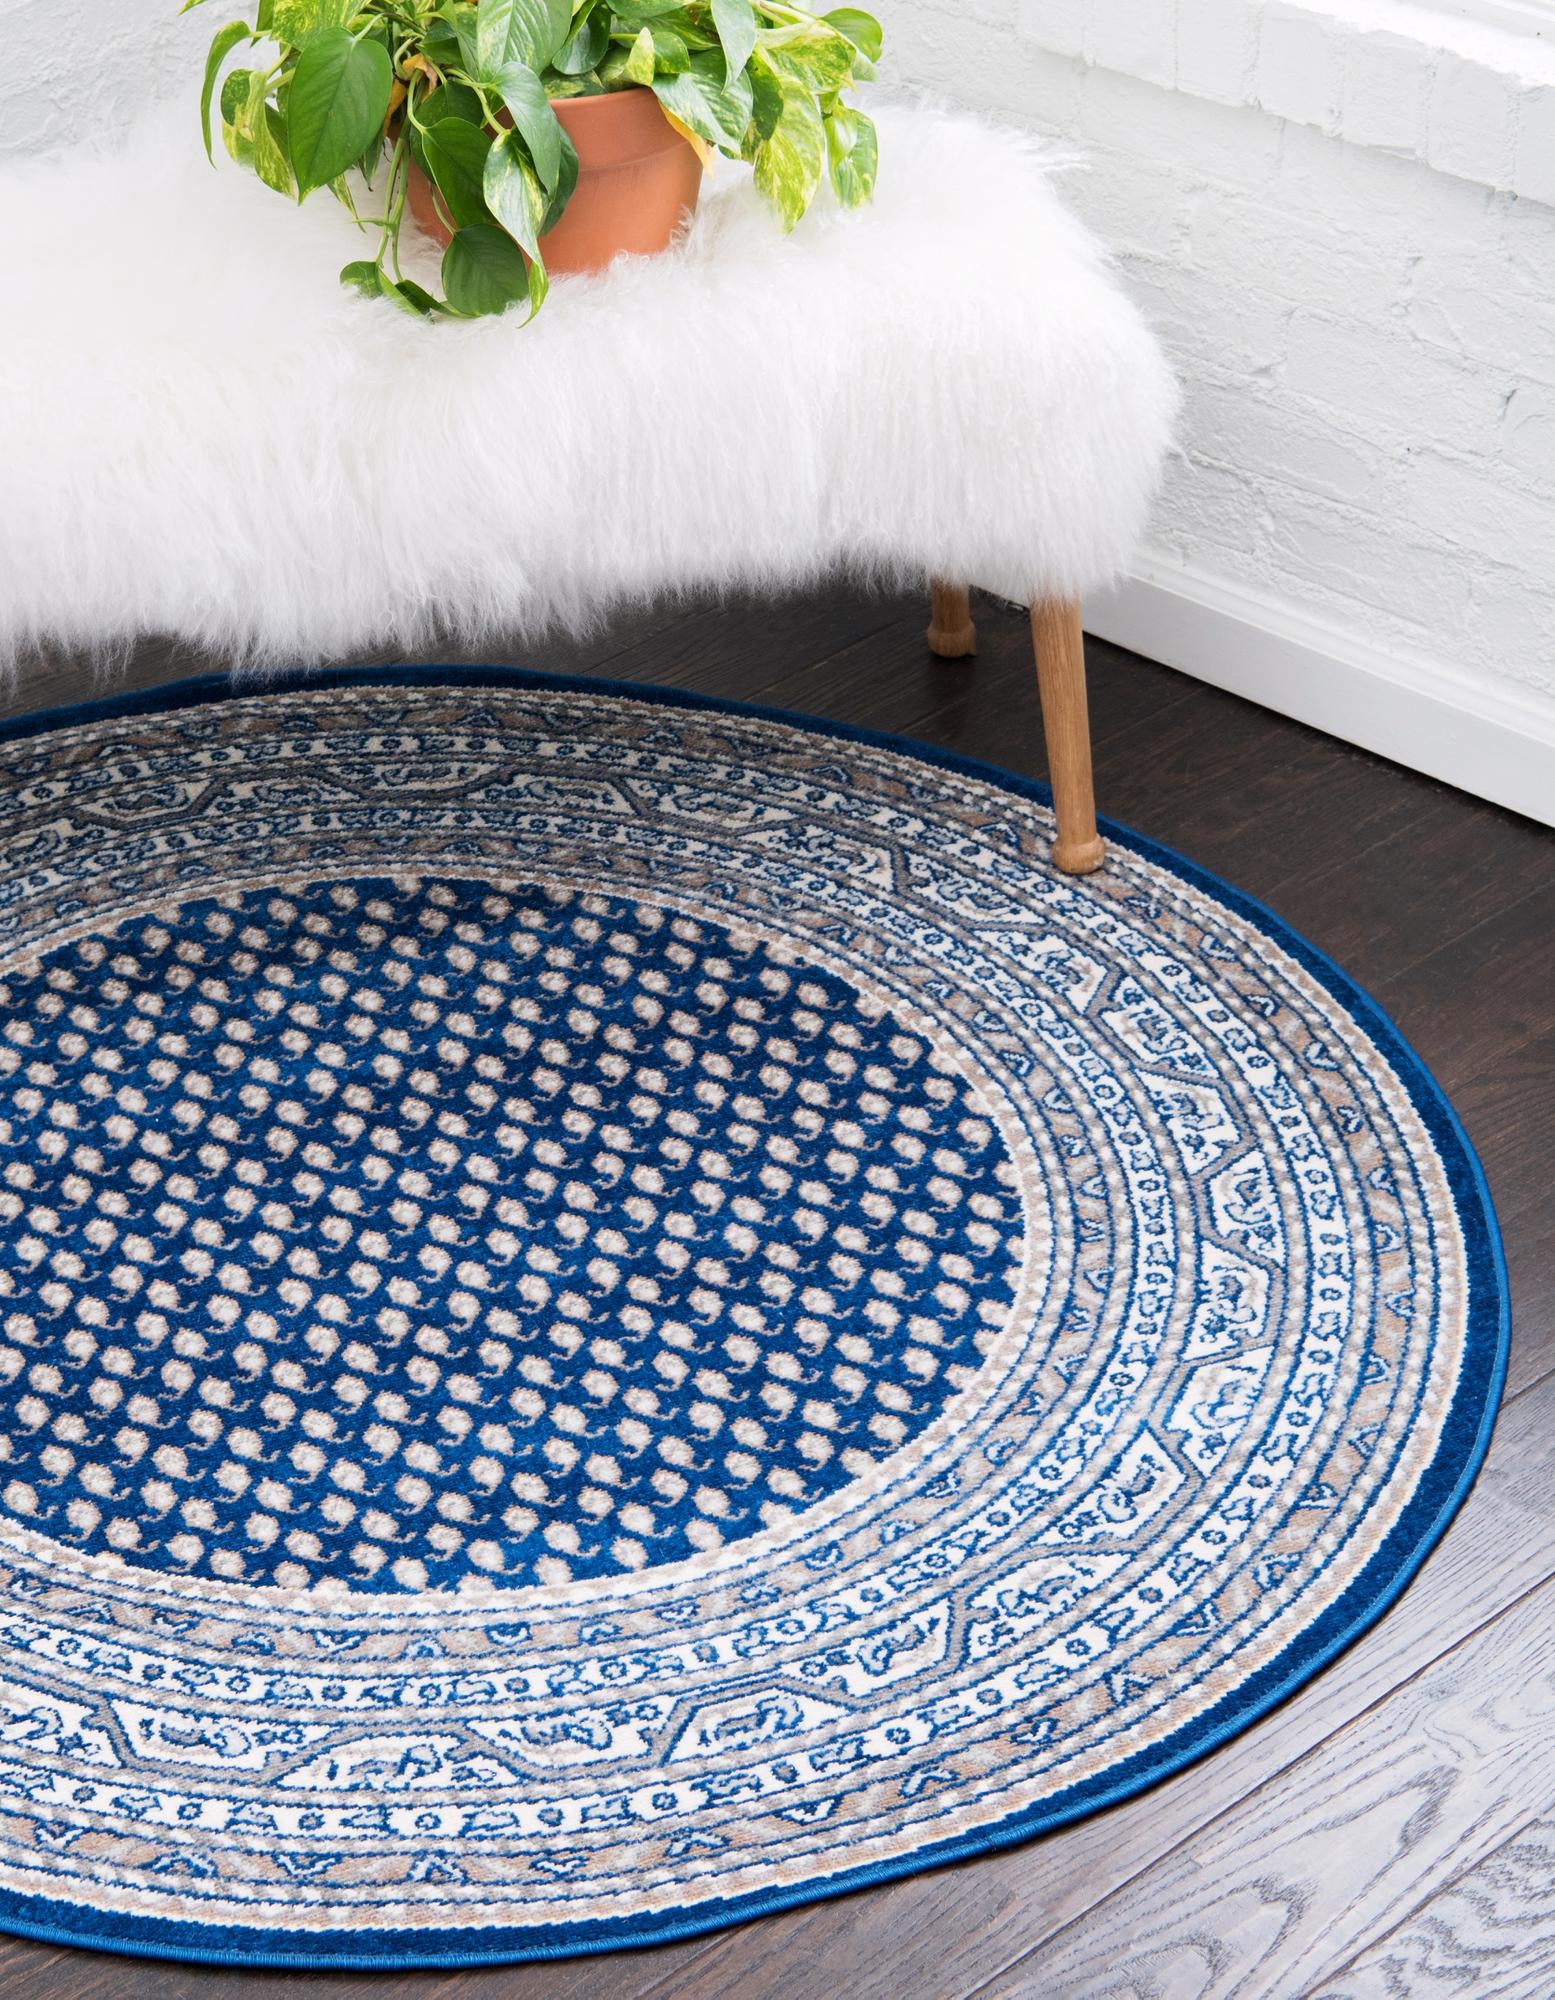 Unique Loom Allover Williamsburg Rug Blue/Gray 5' 1" Round Hand Made Geometric Traditional Perfect For Dining Room Entryway Bed Room Kids Room - image 1 of 5